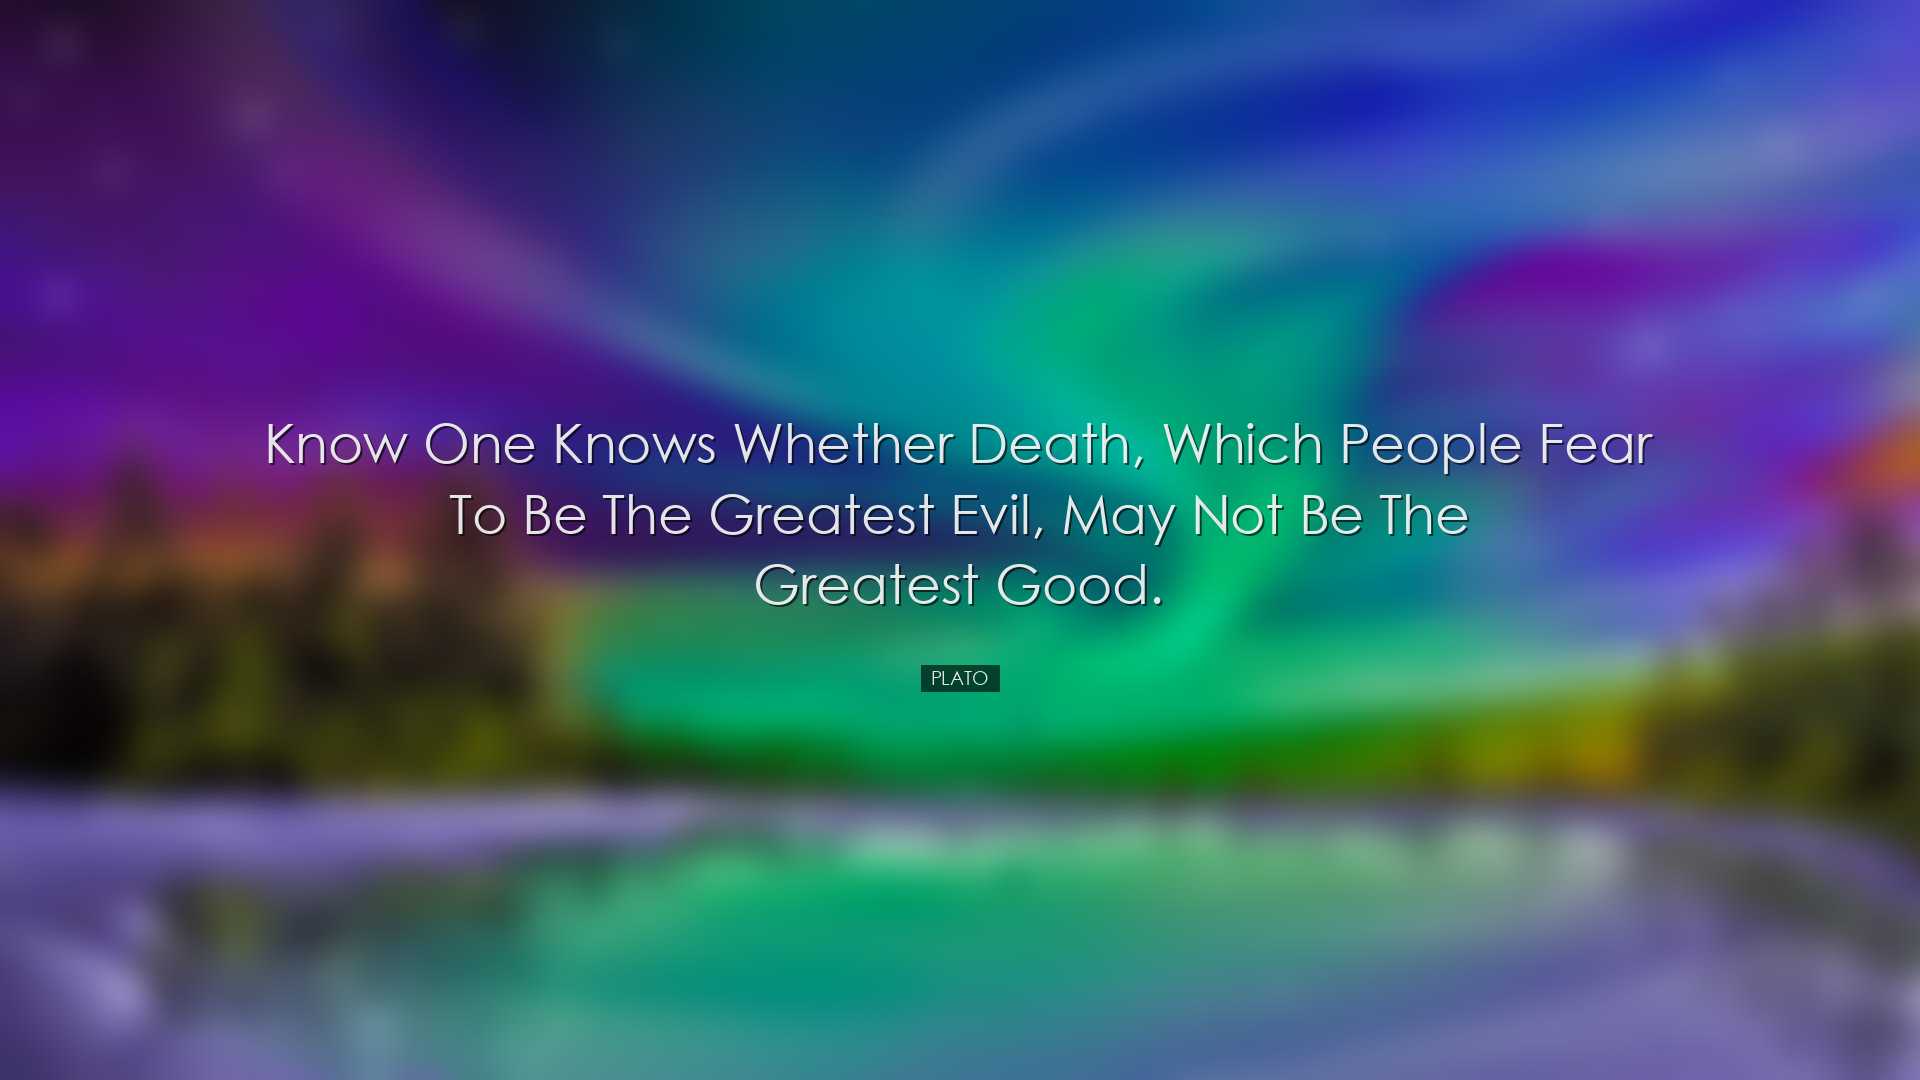 Know one knows whether death, which people fear to be the greatest